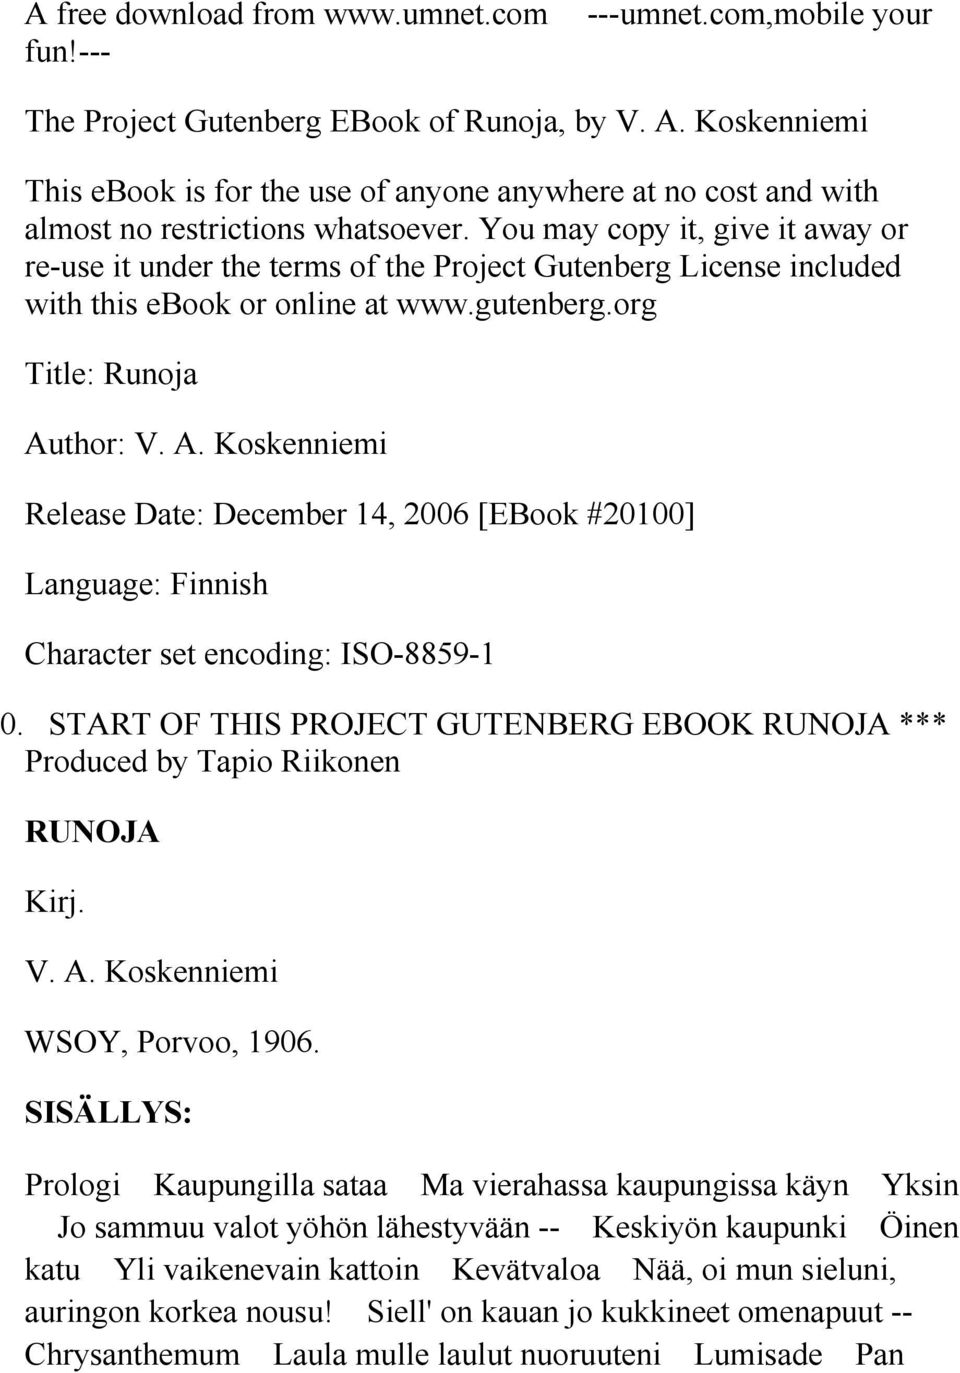 You may copy it, give it away or re-use it under the terms of the Project Gutenberg License included with this ebook or online at www.gutenberg.org Title: Runoja Au